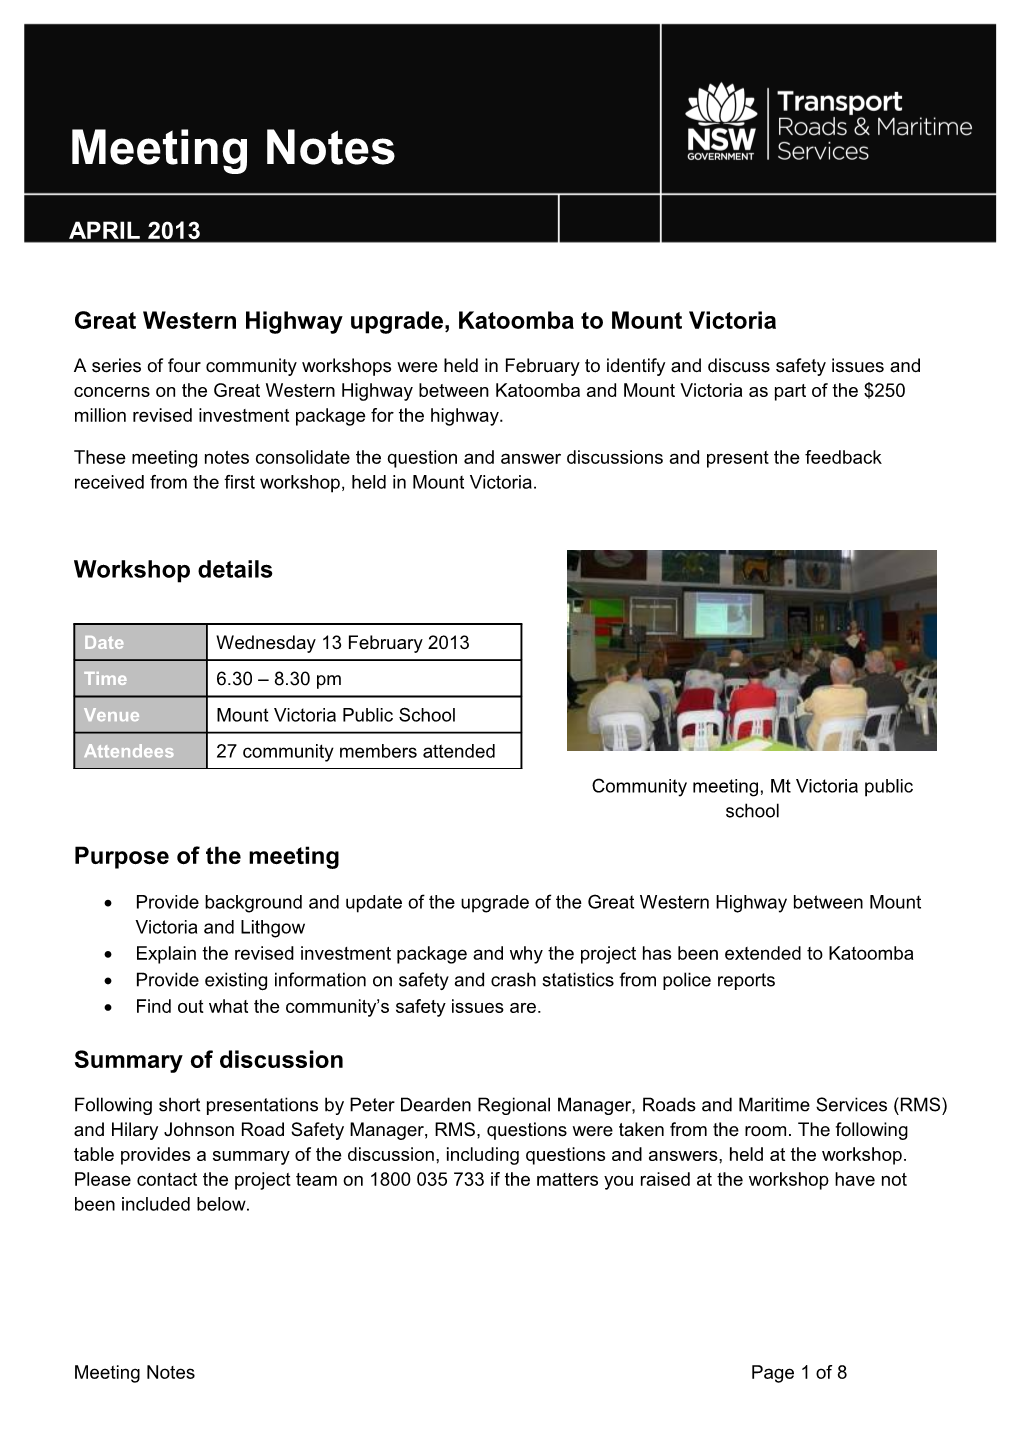 Great Western Highway Upgrade Meeting Notes, Katoomba to Mount Victoria - 13 February 2013